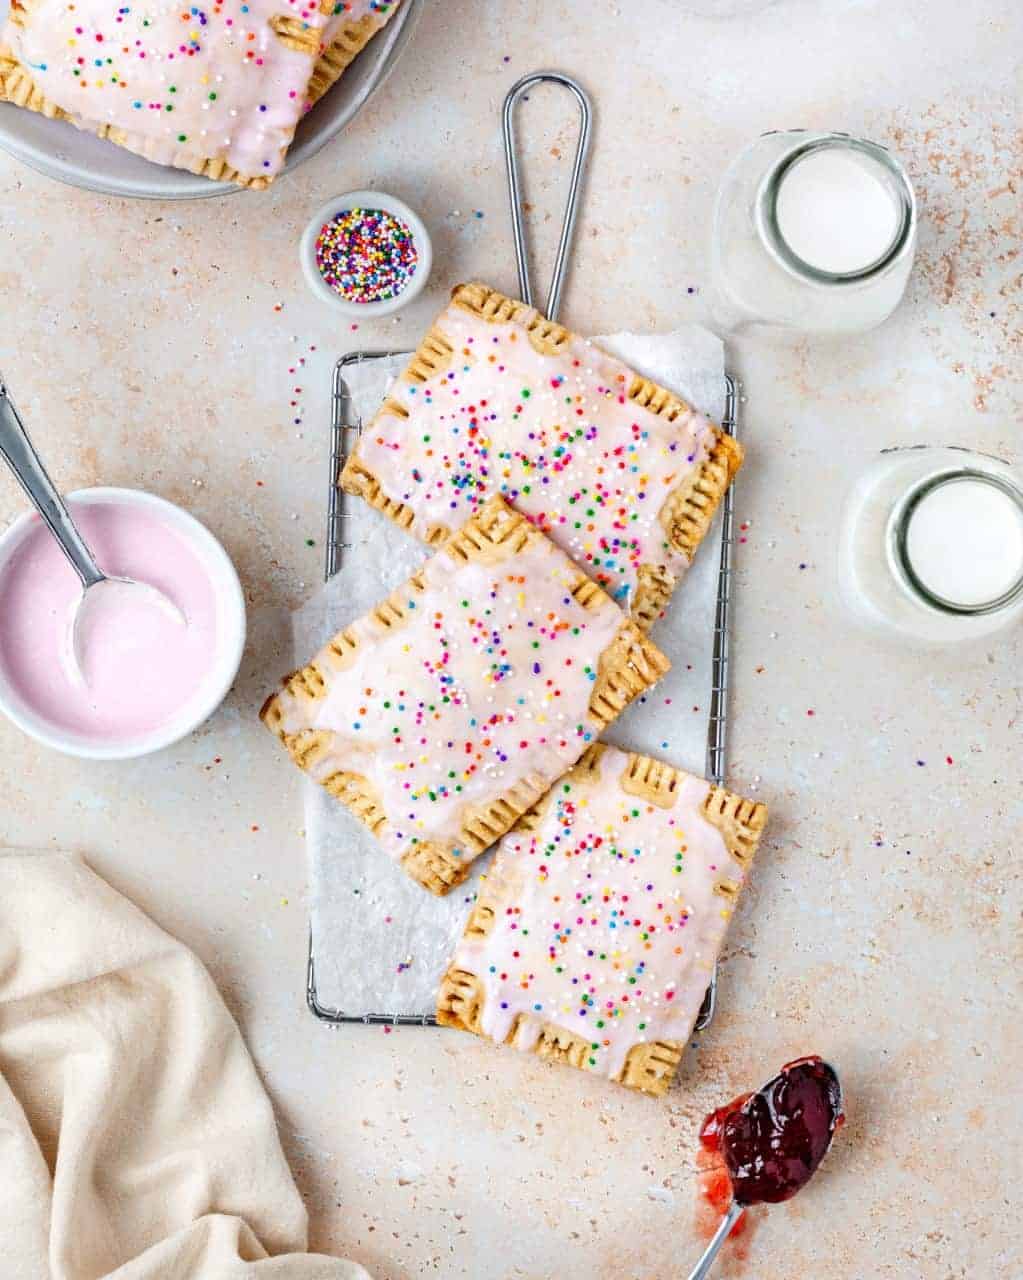 Homemade Vegan Strawberry Poptarts topped with pink vanilla icing and sprinkles on a cooling rack.